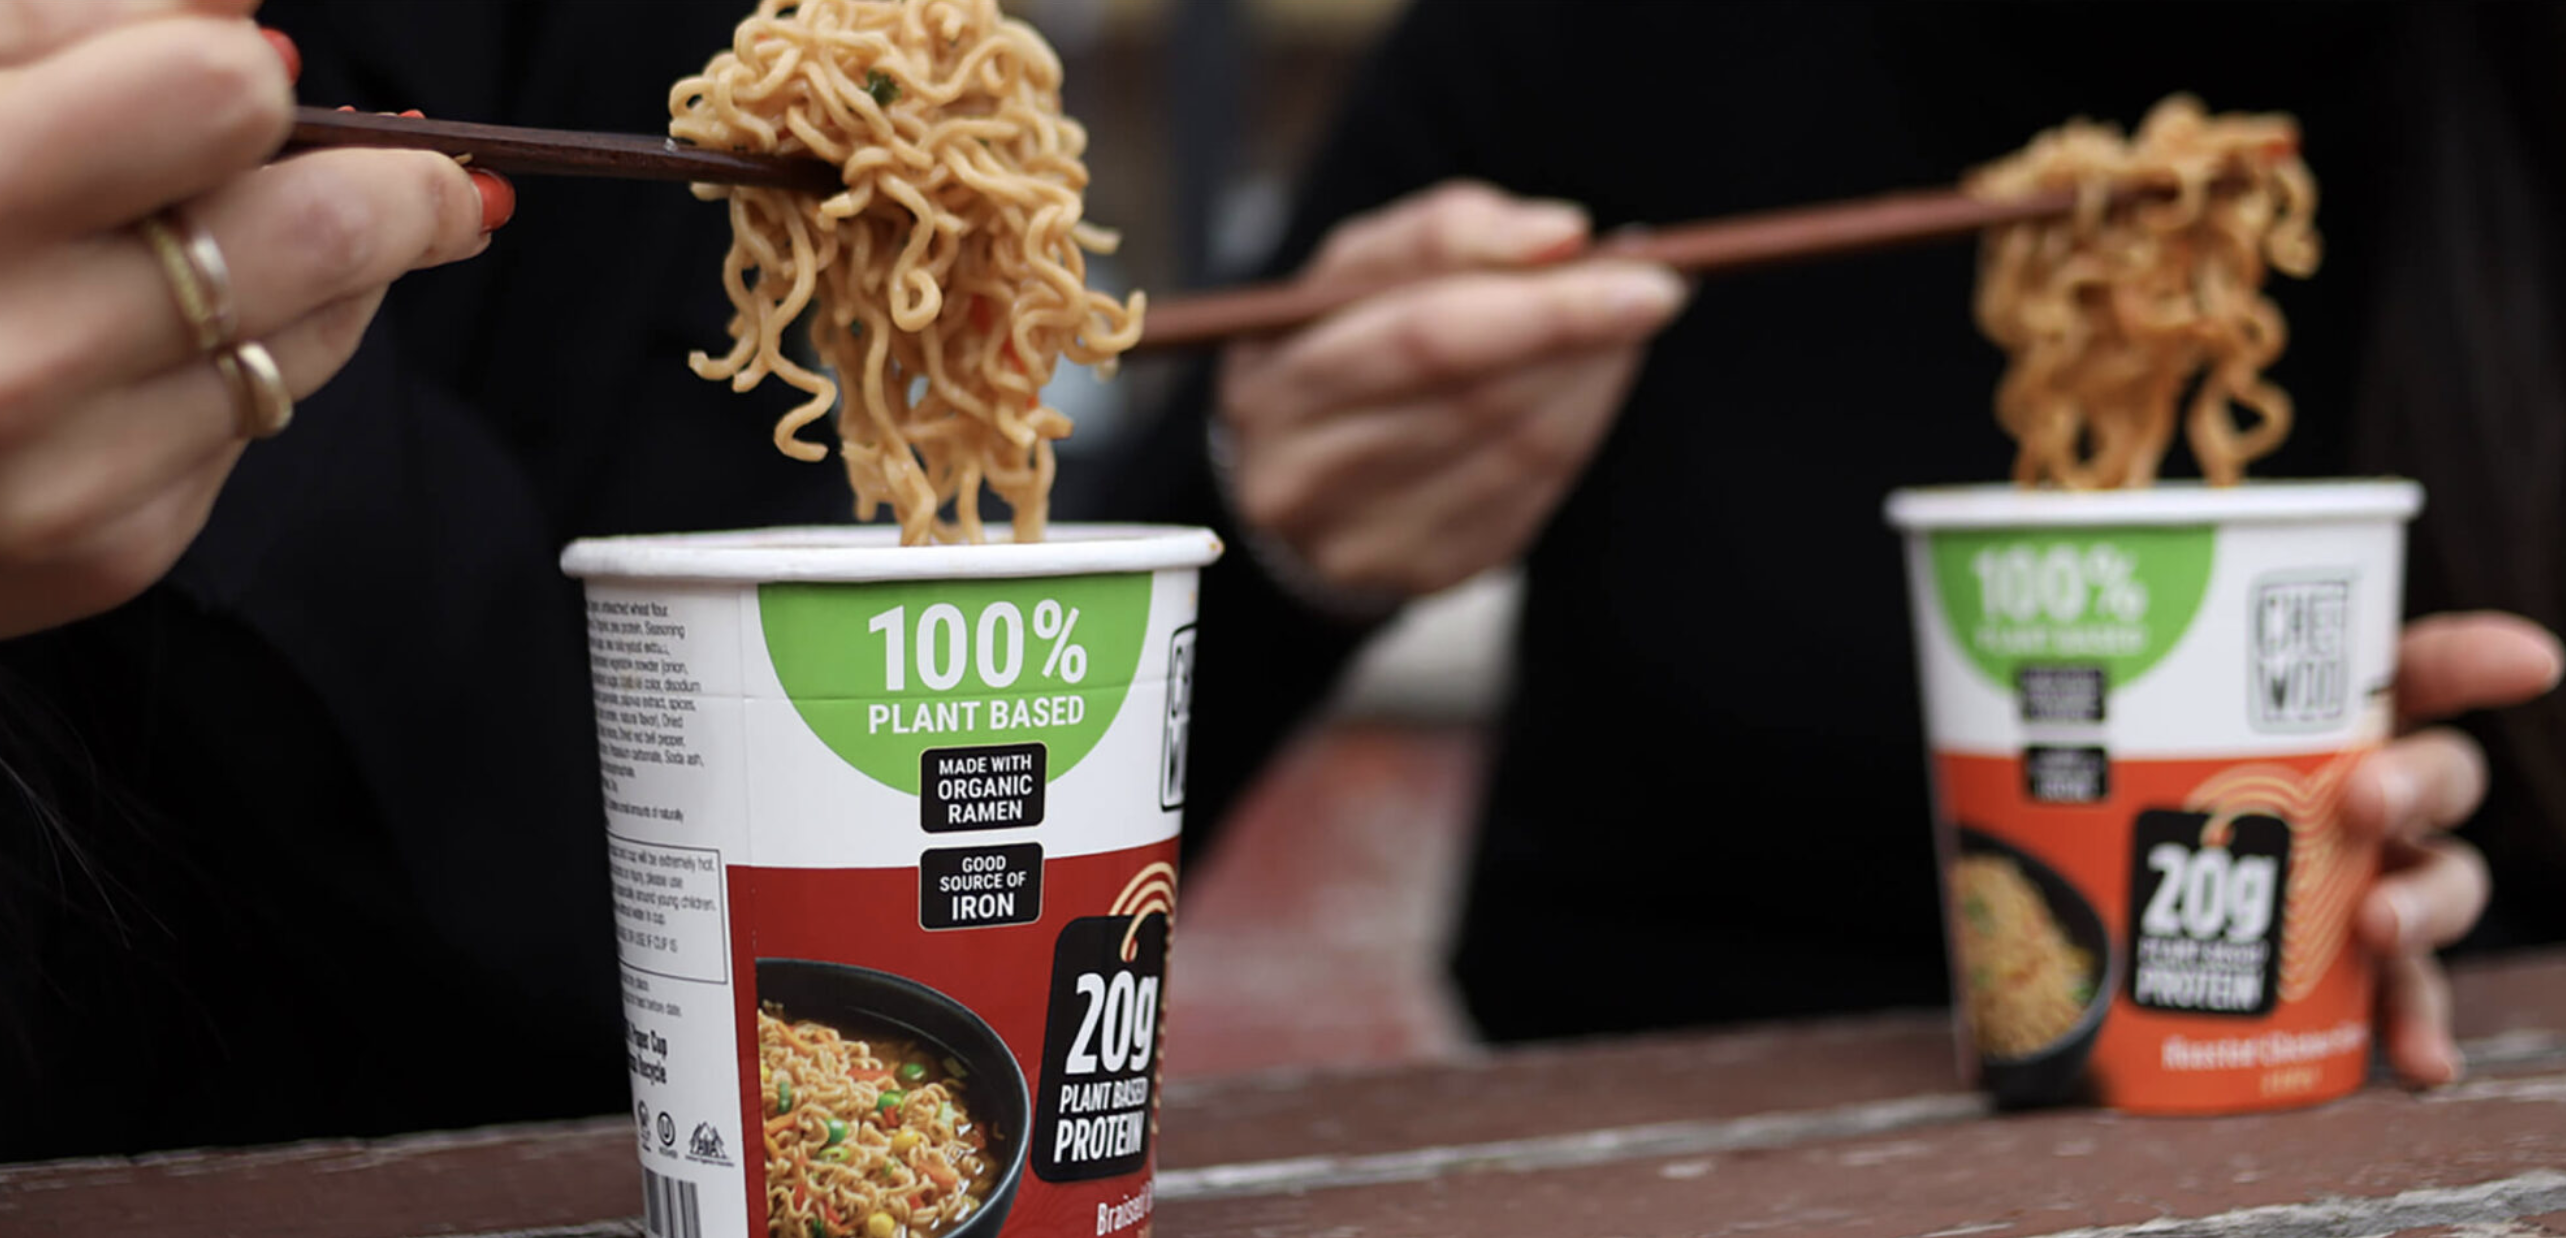 Hungry for a Modern, Healthier Ramen? We tasted Chef Woo Instant Ramen